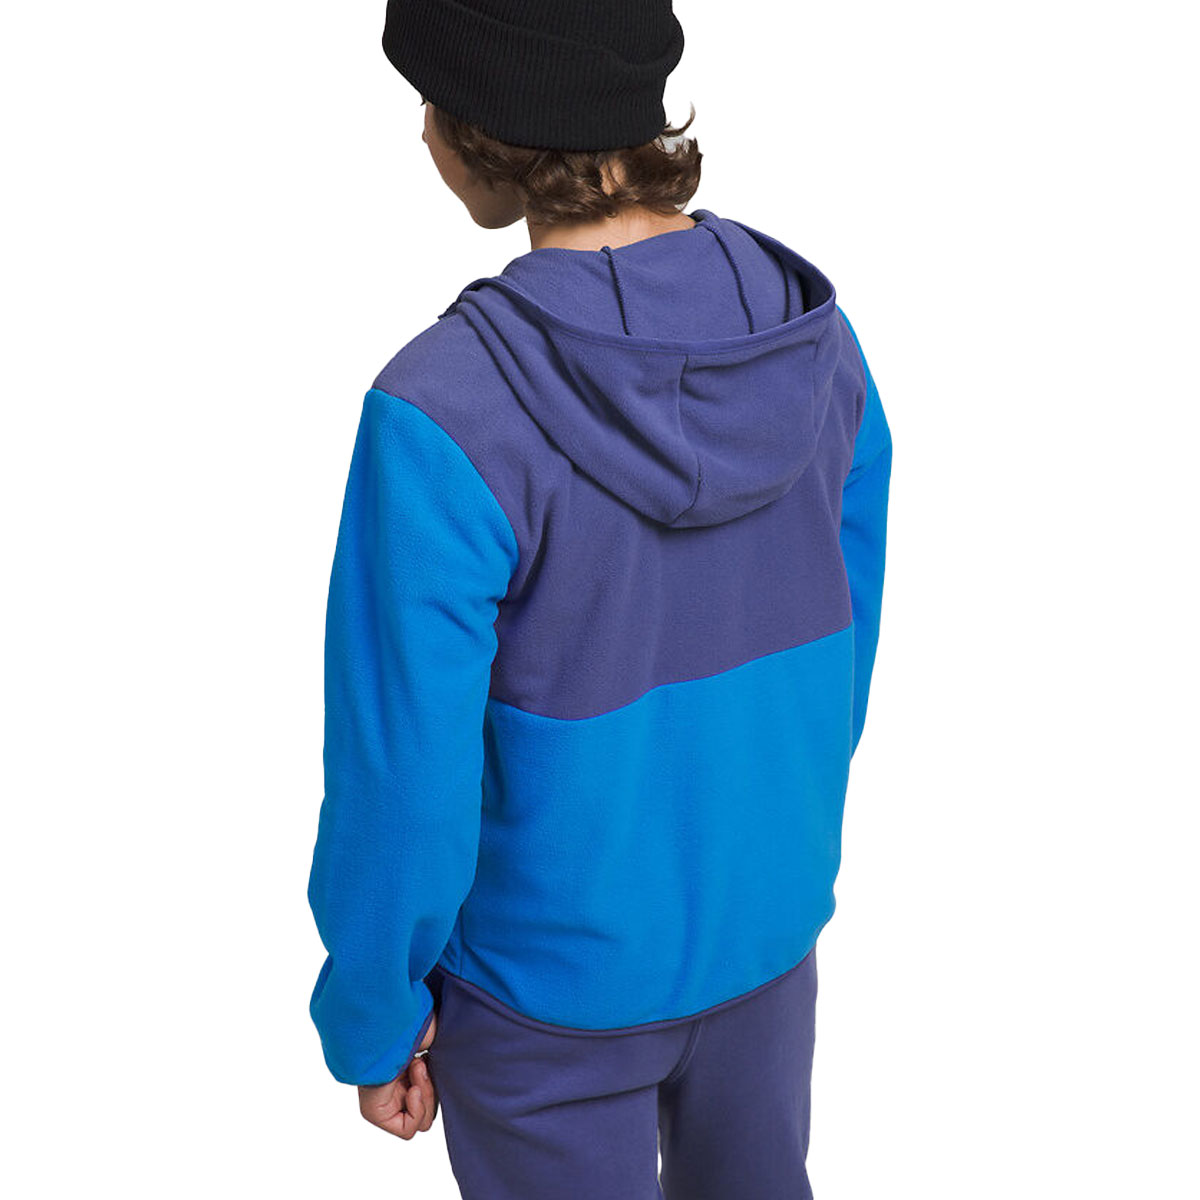 THE NORTH FACE - TEEN GLACIER F/Z HOODED